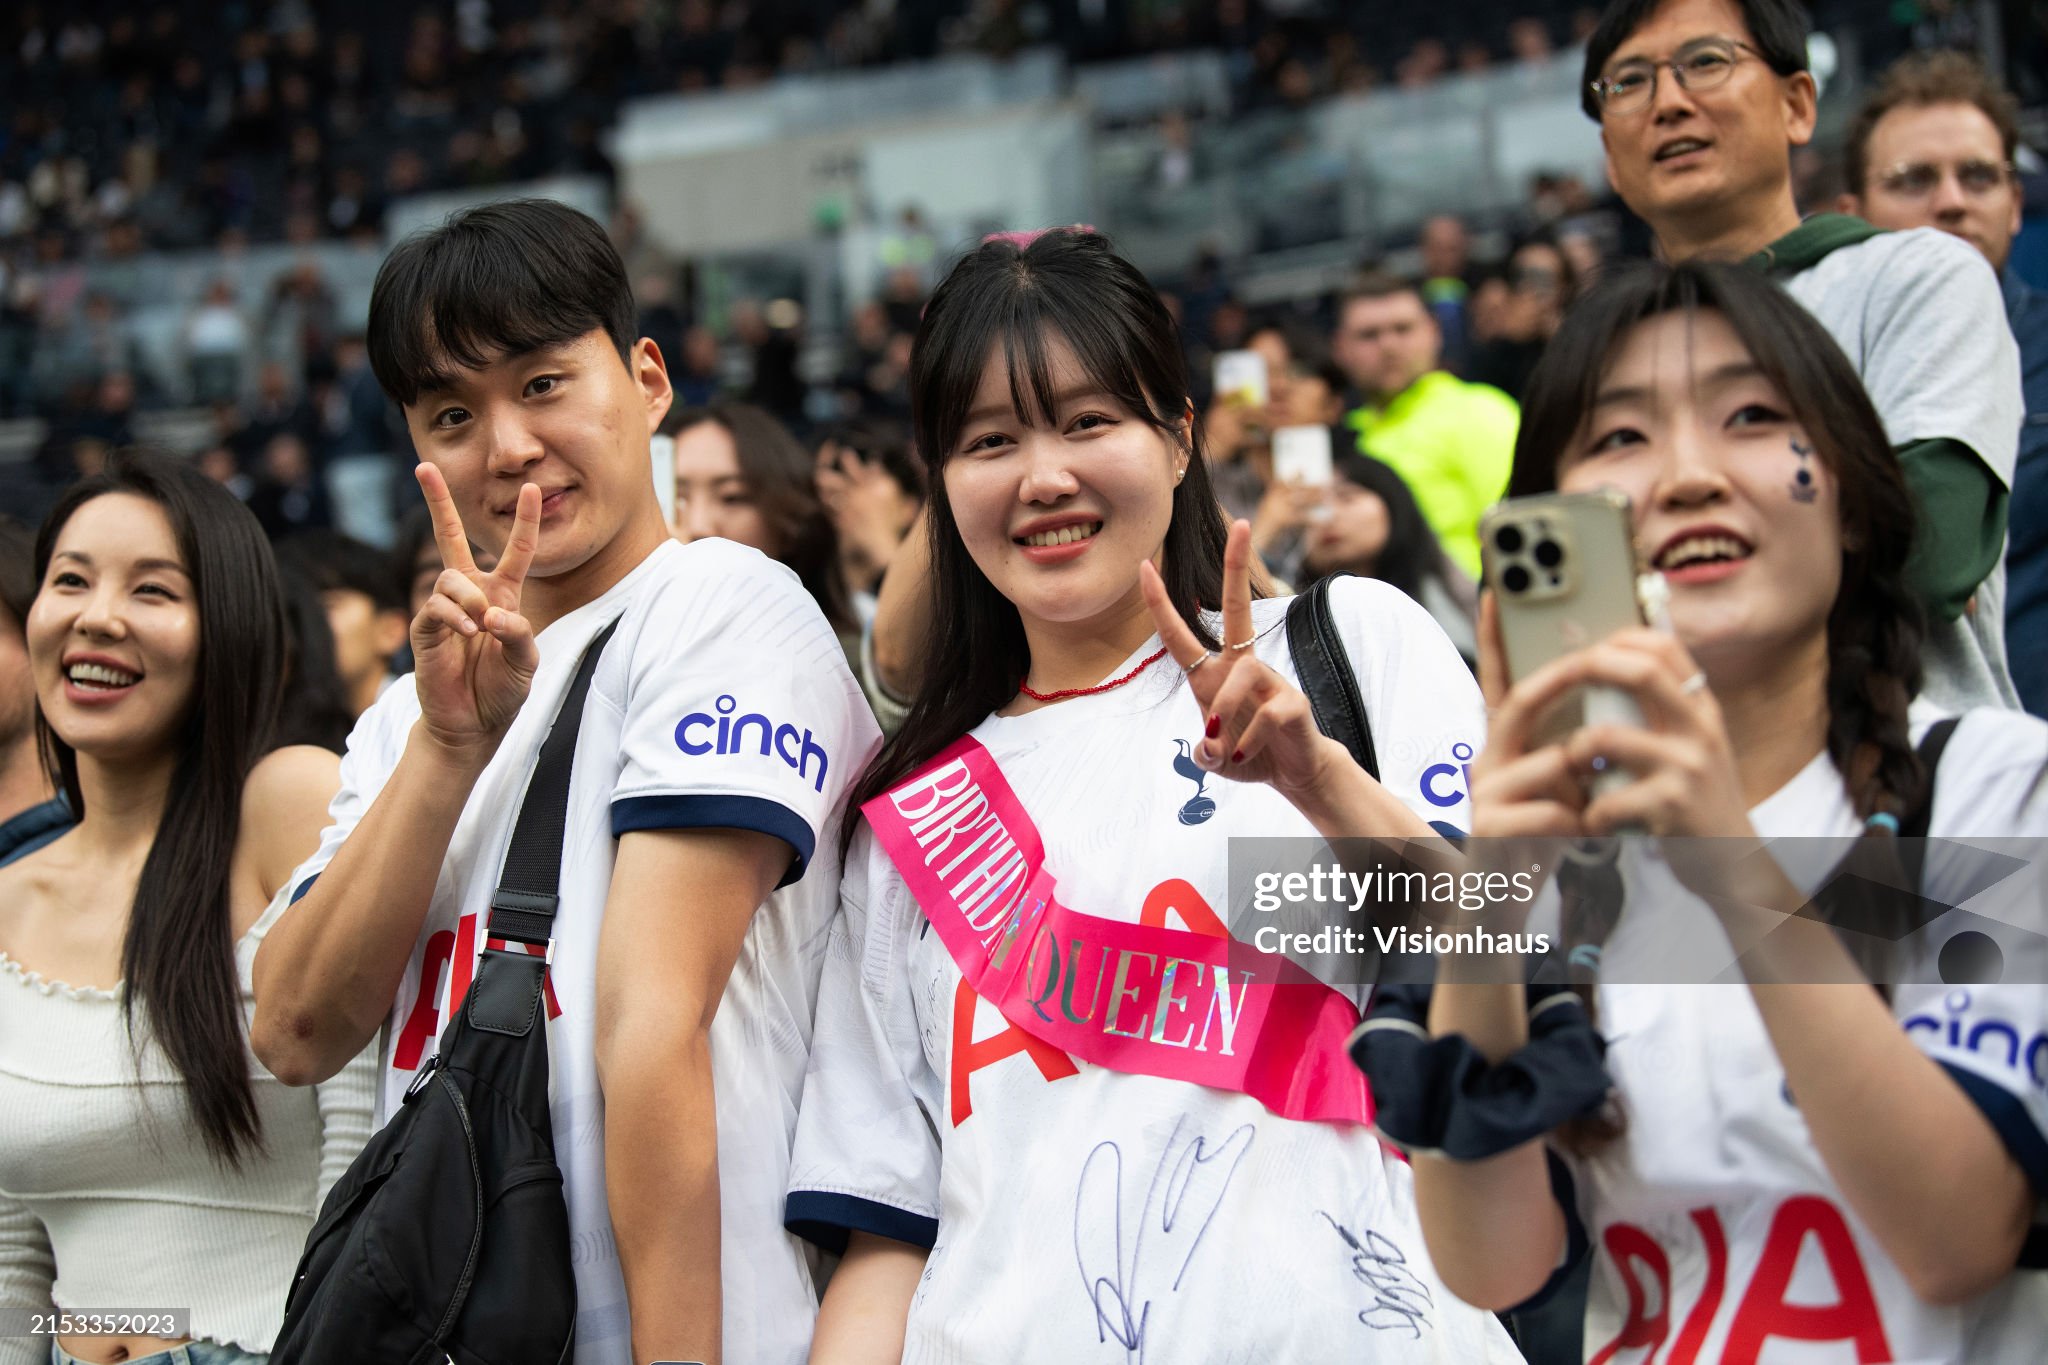 gettyimages-2153352023-2048x2048.jpg